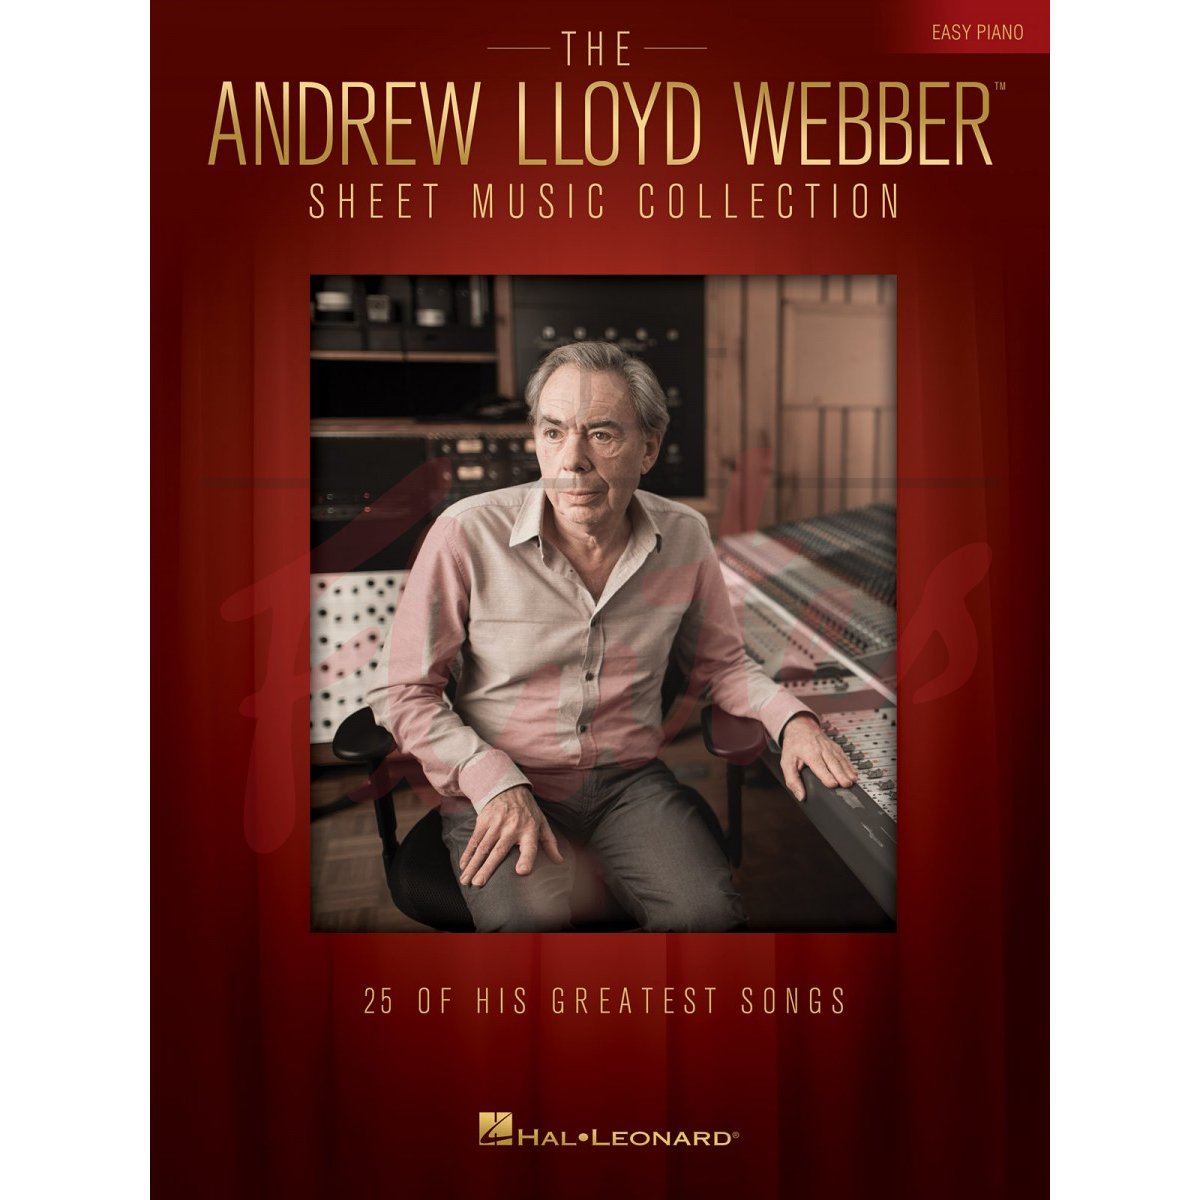 The Andrew Lloyd Webber Sheet Music Collection - Easy Piano